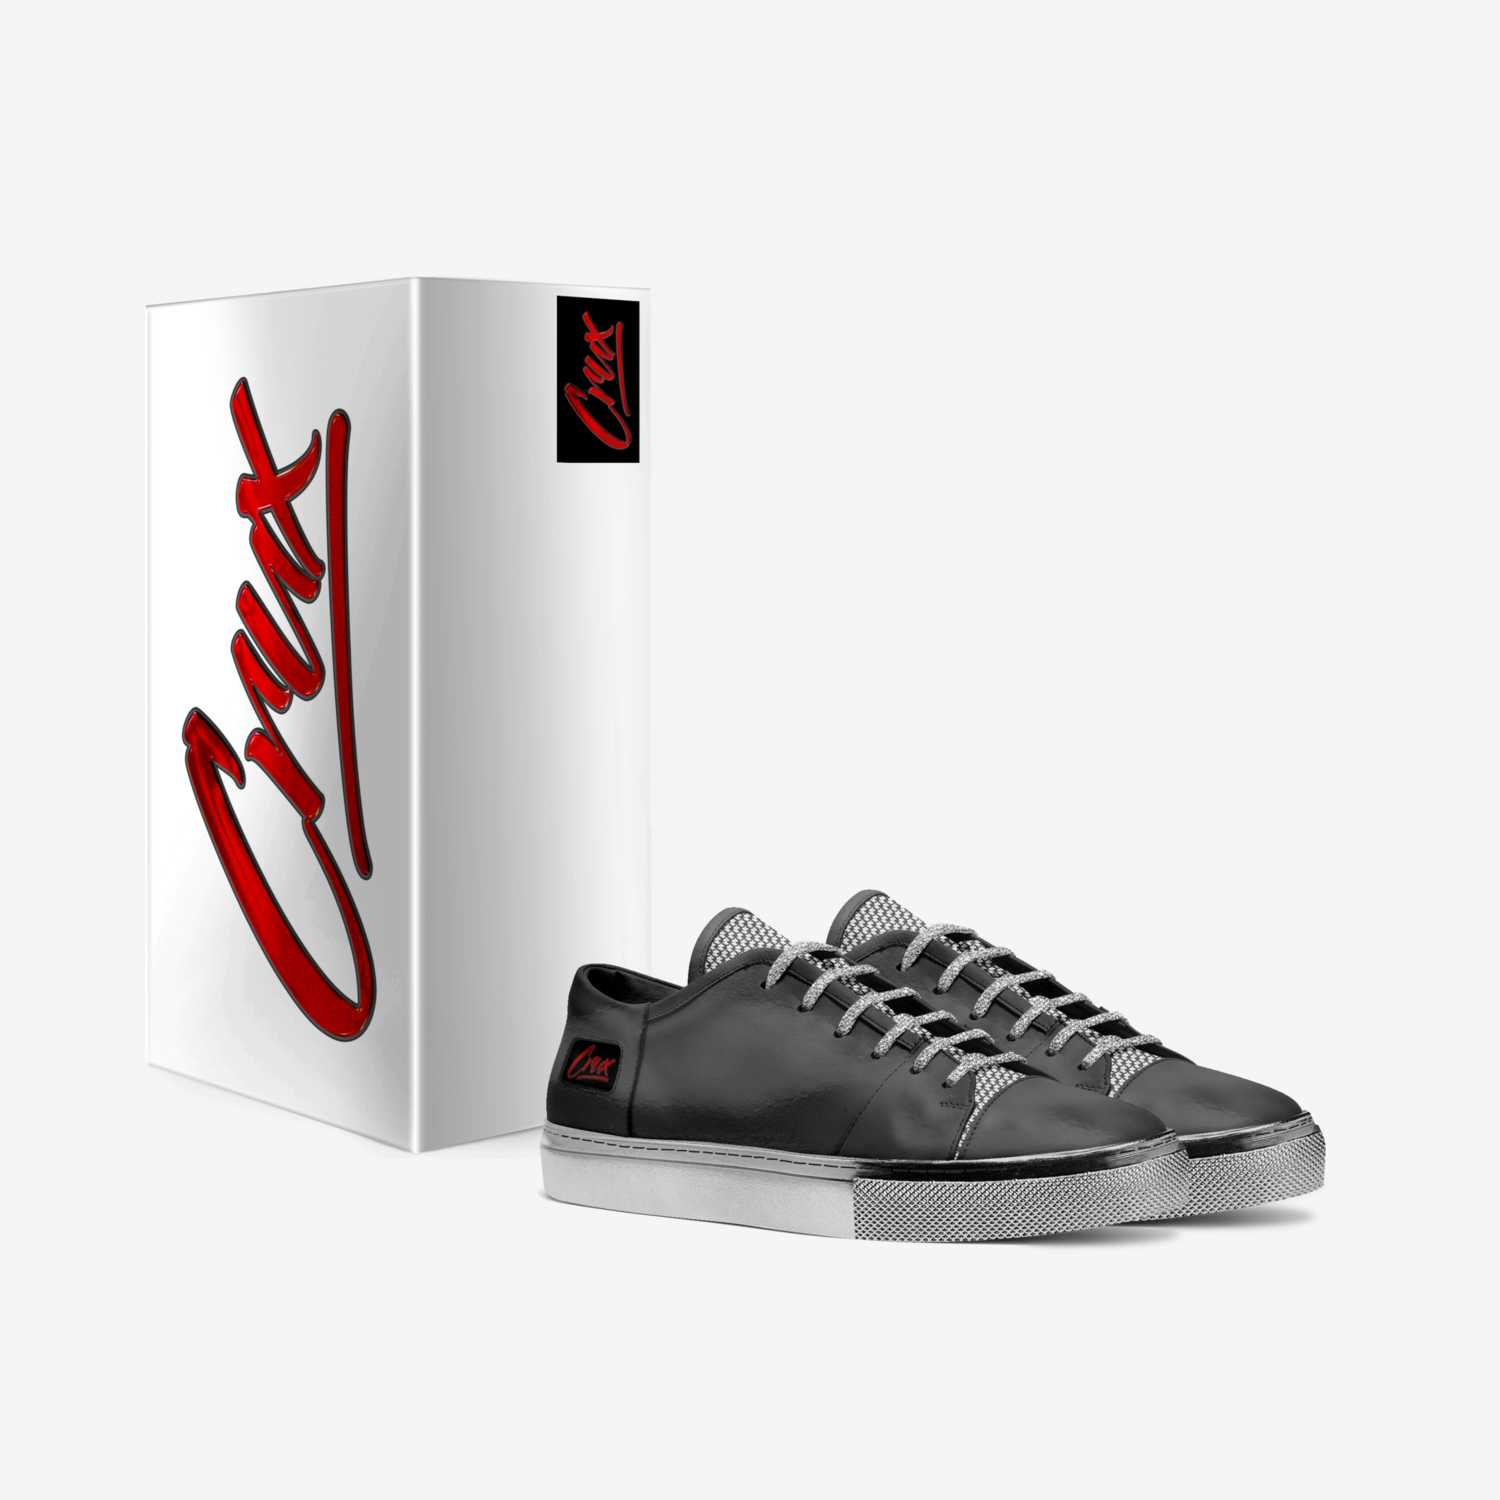 Crux Elite 1 custom made in Italy shoes by Terrence Degree | Box view